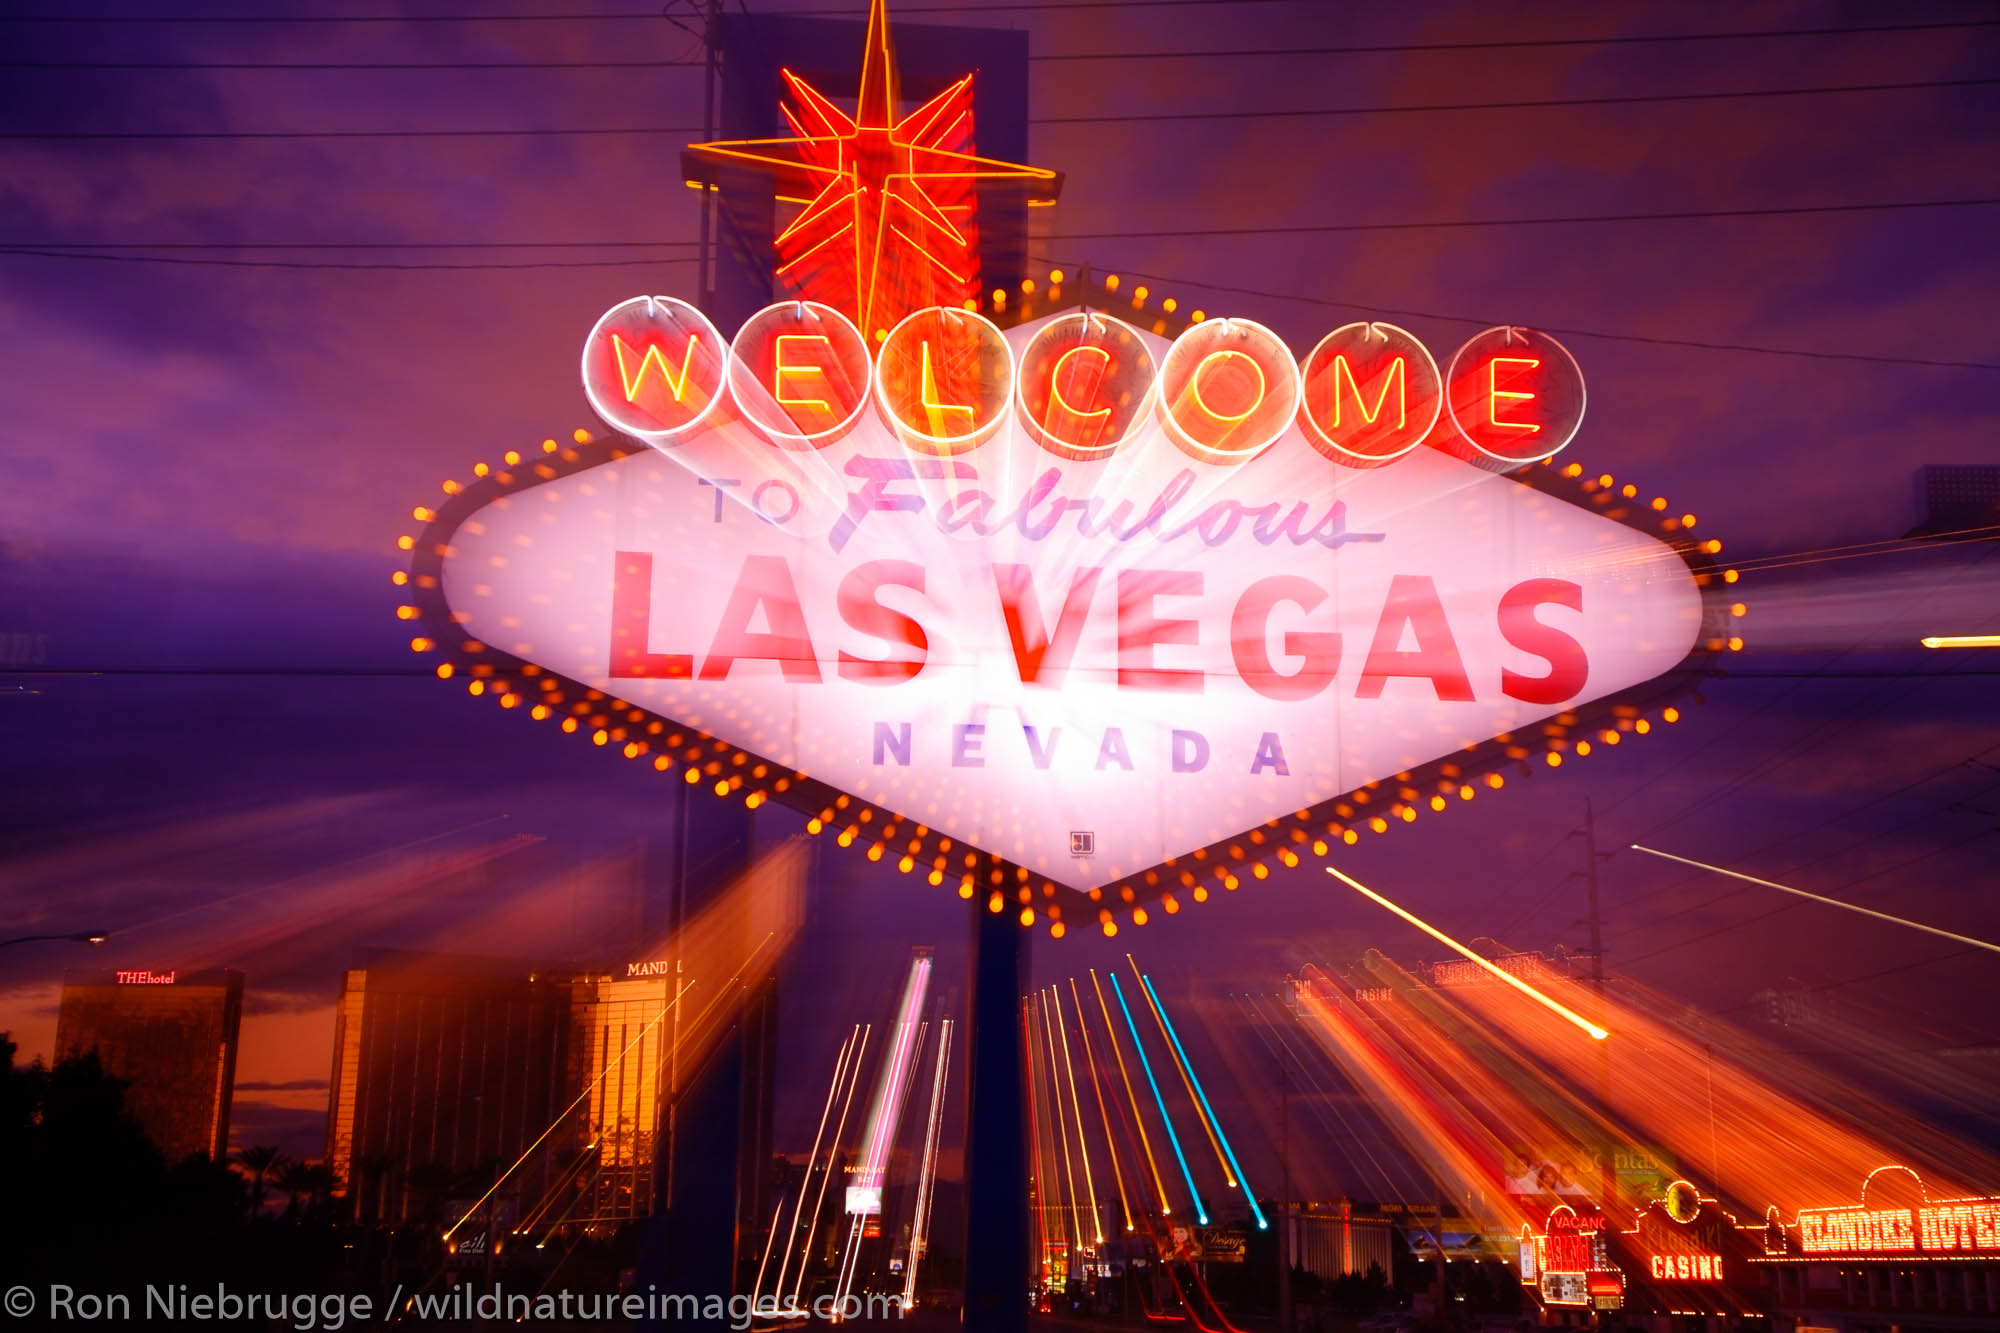 The Welcome to Las Vegas sign at night, Las Vegas, Nevada.